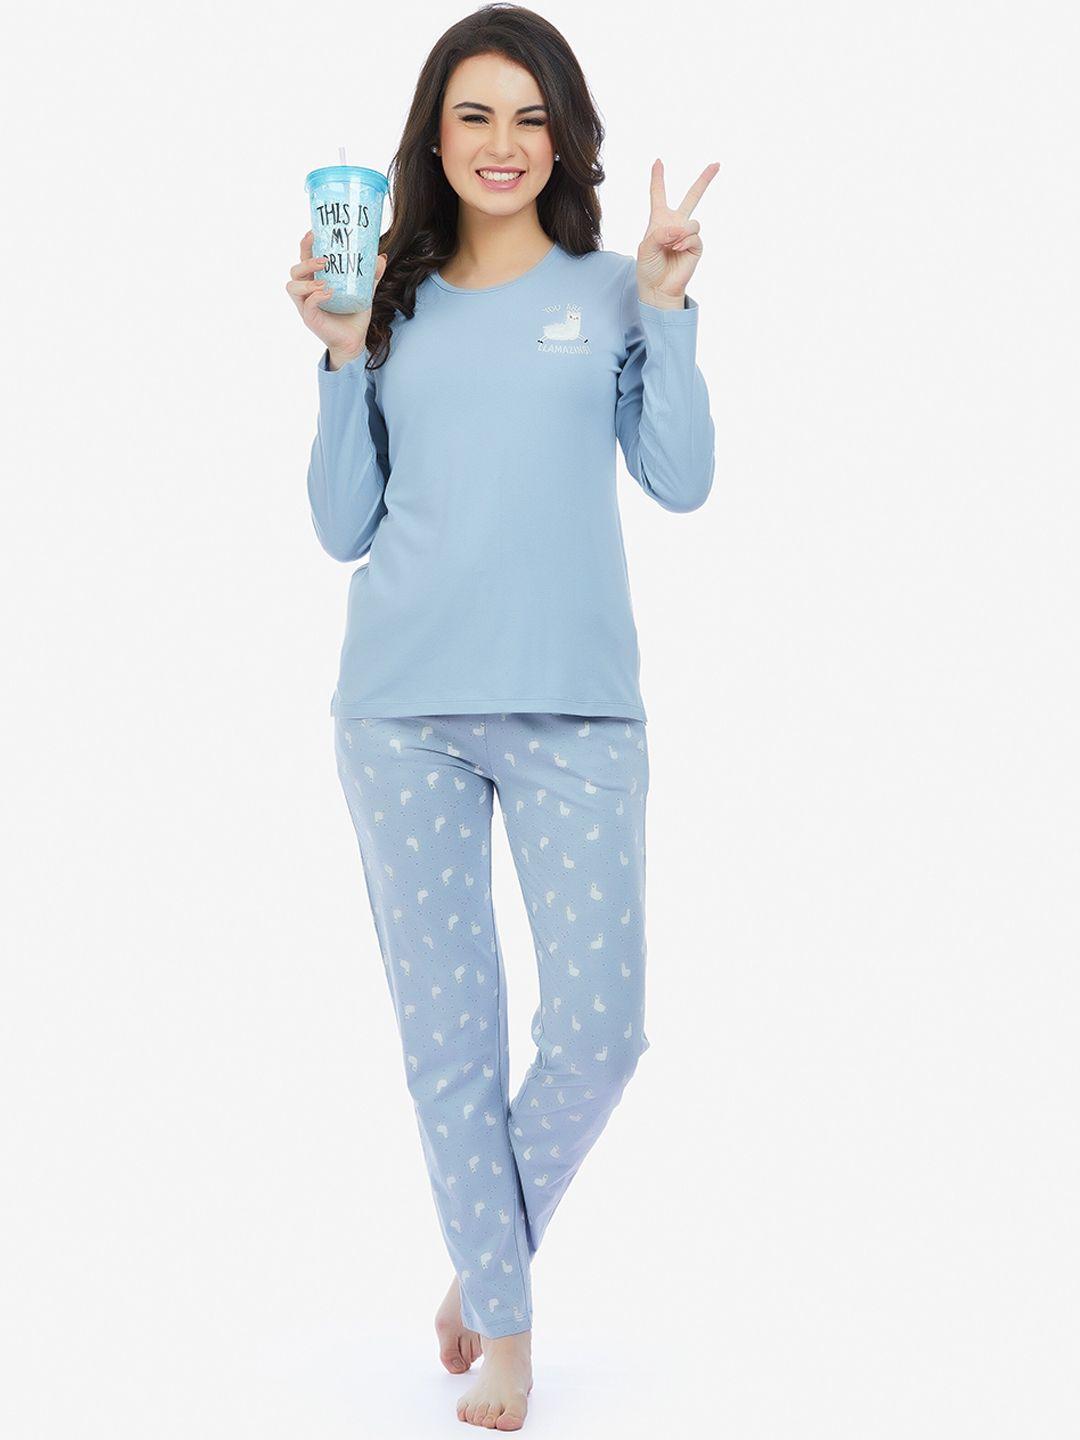 maysixty-women-graphic-printed-pure-cotton-night-suit